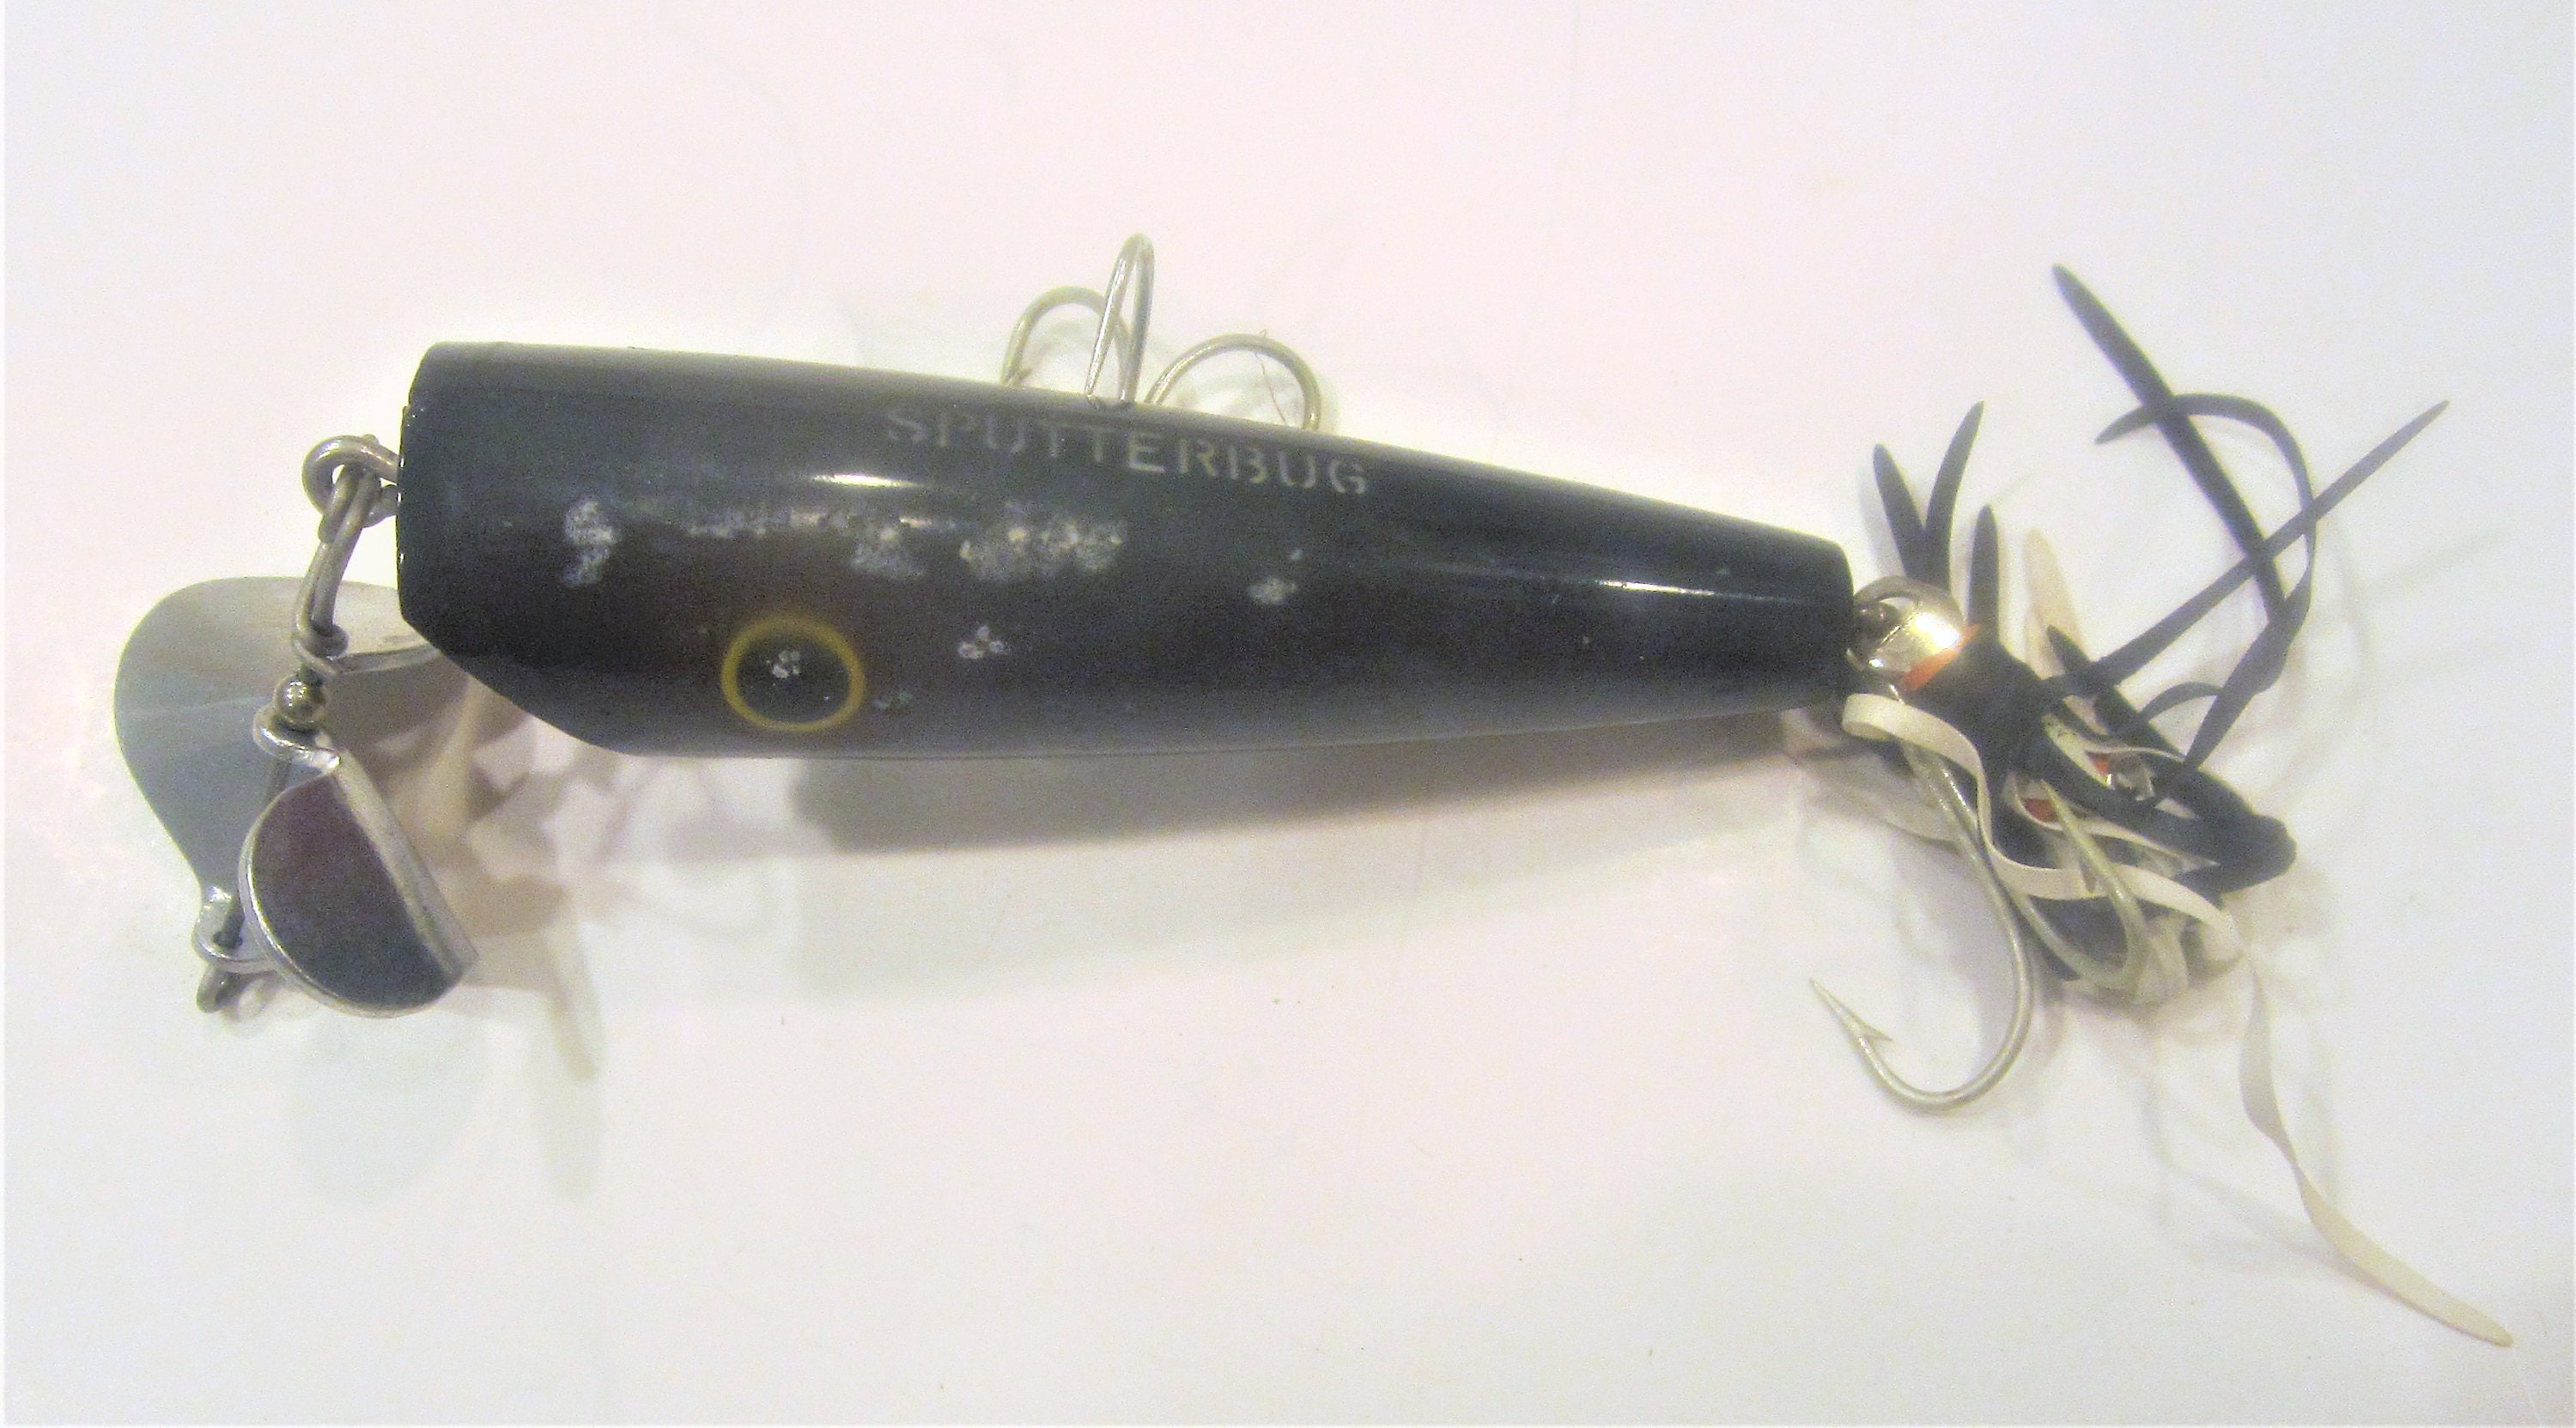 Vintage Sputterbug Lure / by Fred Arbogast / New in Box / Issued 1955 / All  Original / 3 1/4 Size / Very Collectible / Gift Item -  Canada